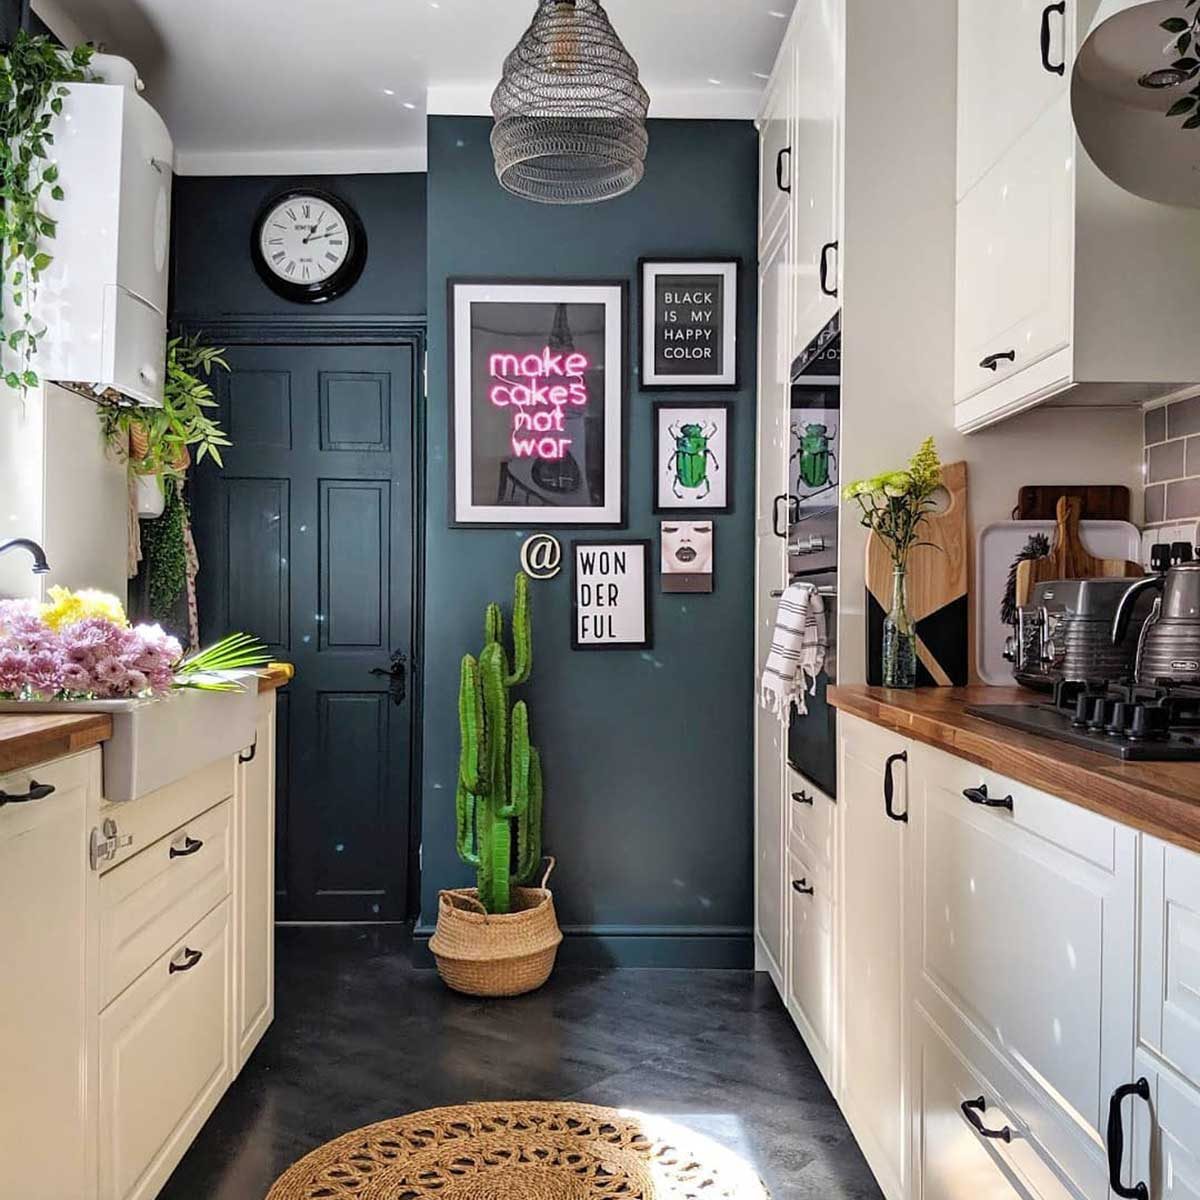 11 Kitchen Decorating Ideas for Your Walls